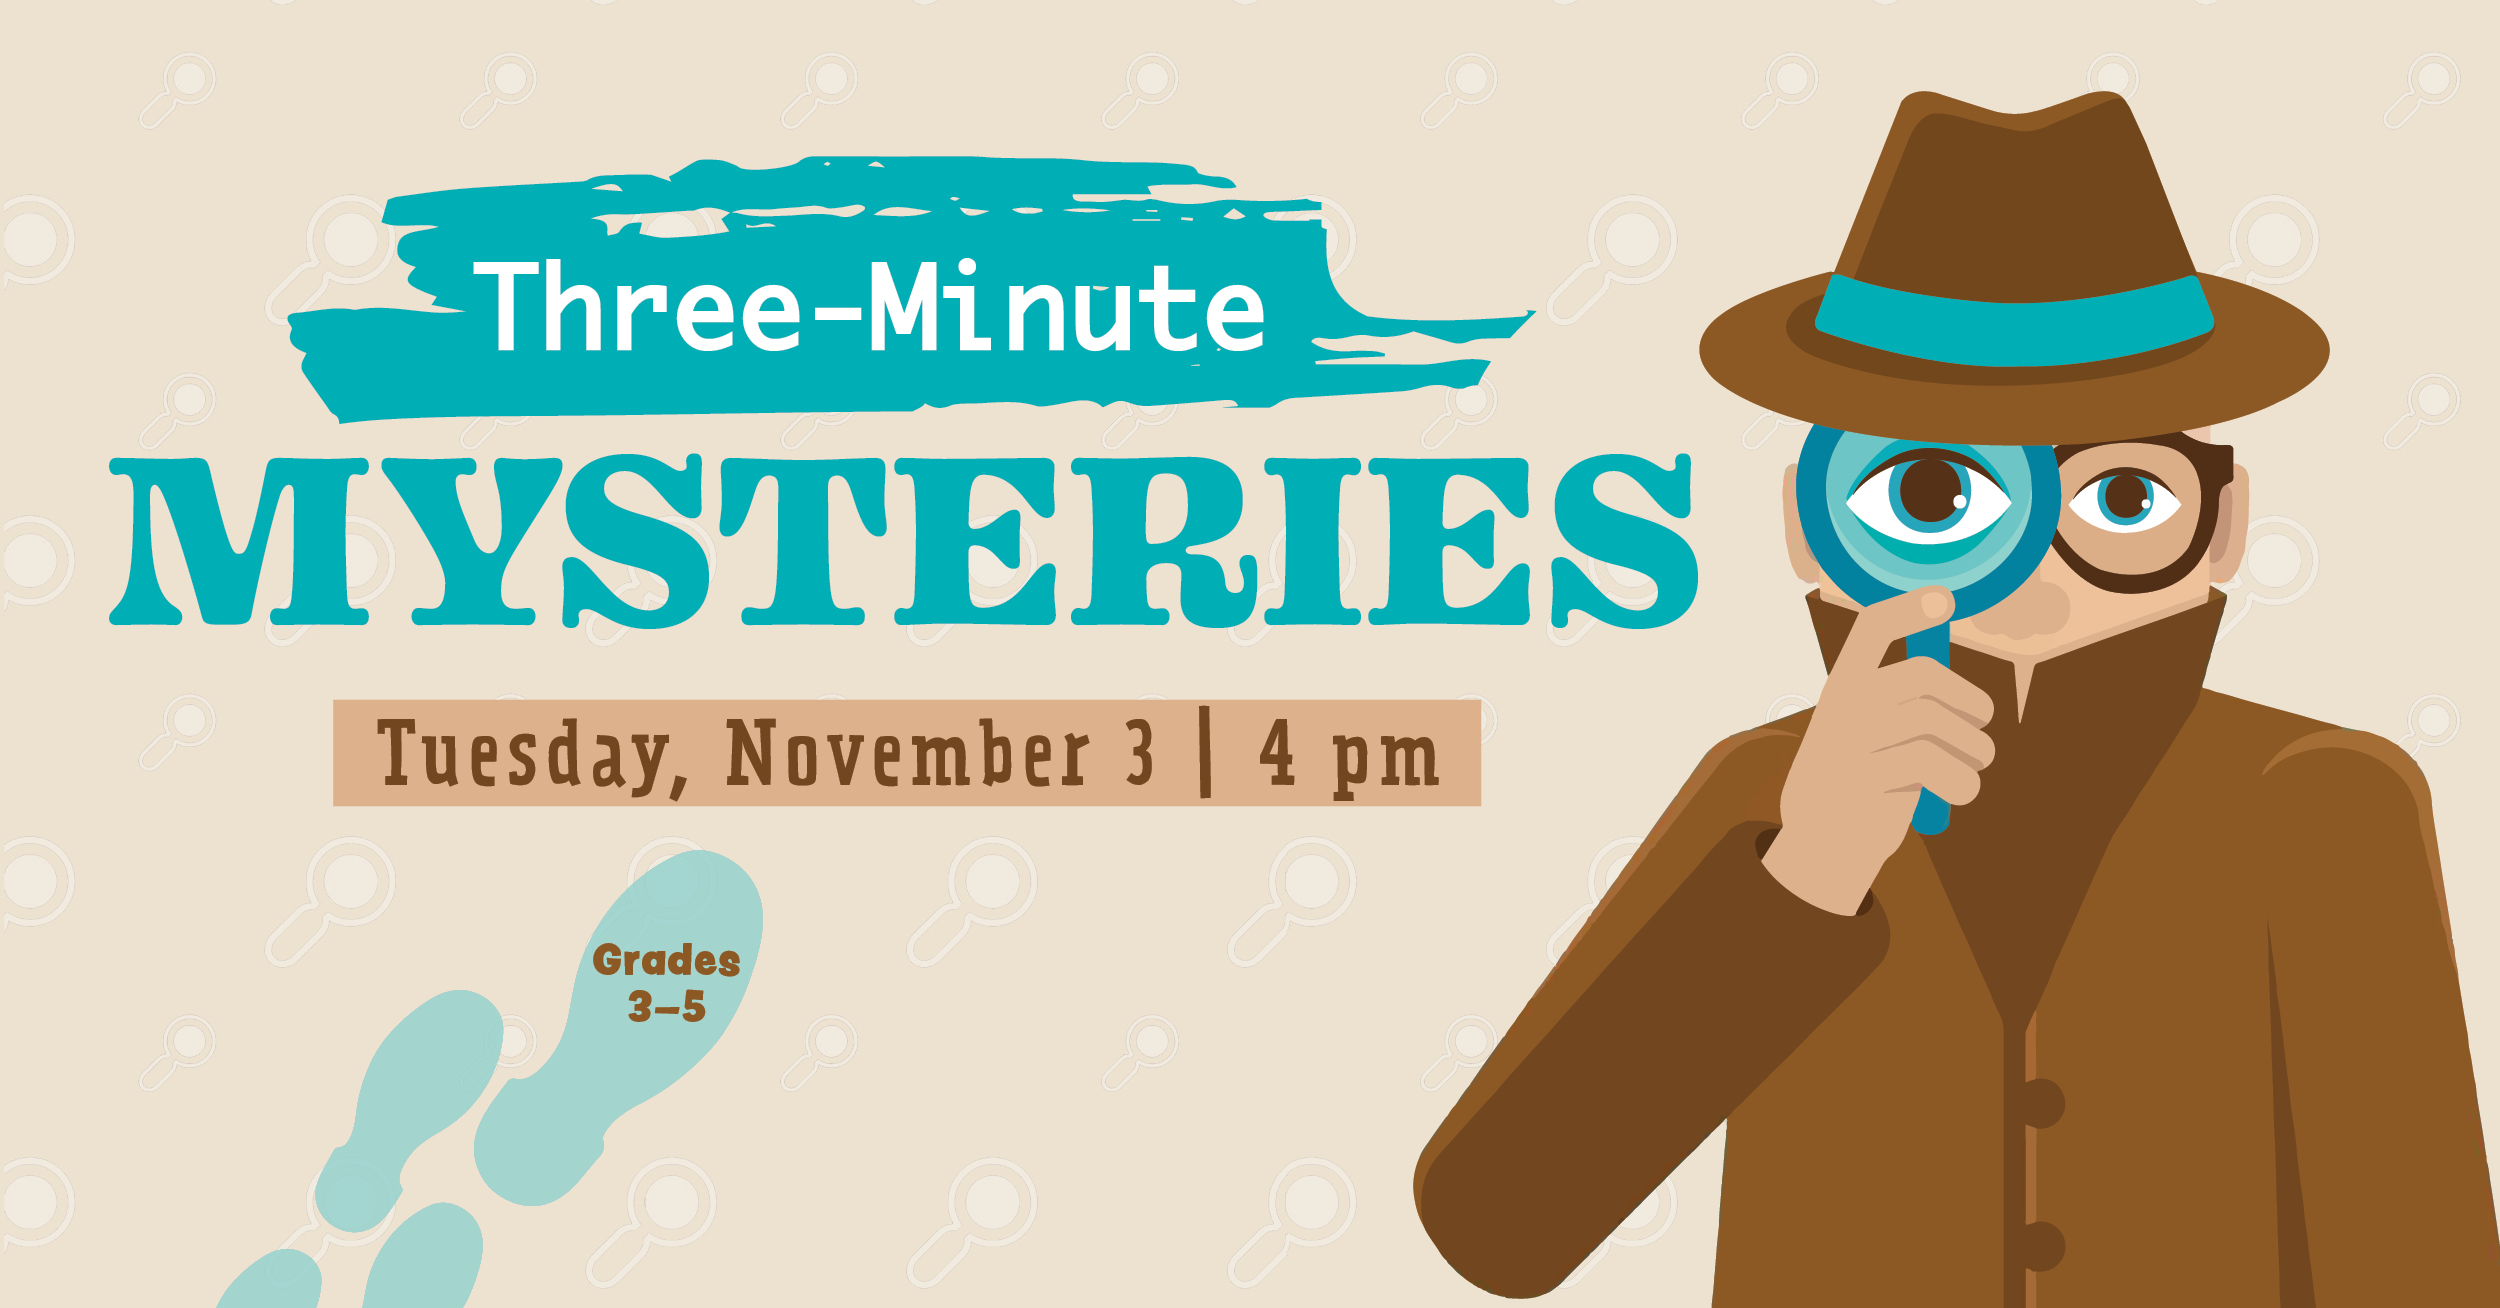 Three-Minute Mysteries. Tuesday, November 3 at 4 PM. Grades 3-5. A private eye holds a magnifying glass to their eyes. Footprints are seen opposite.